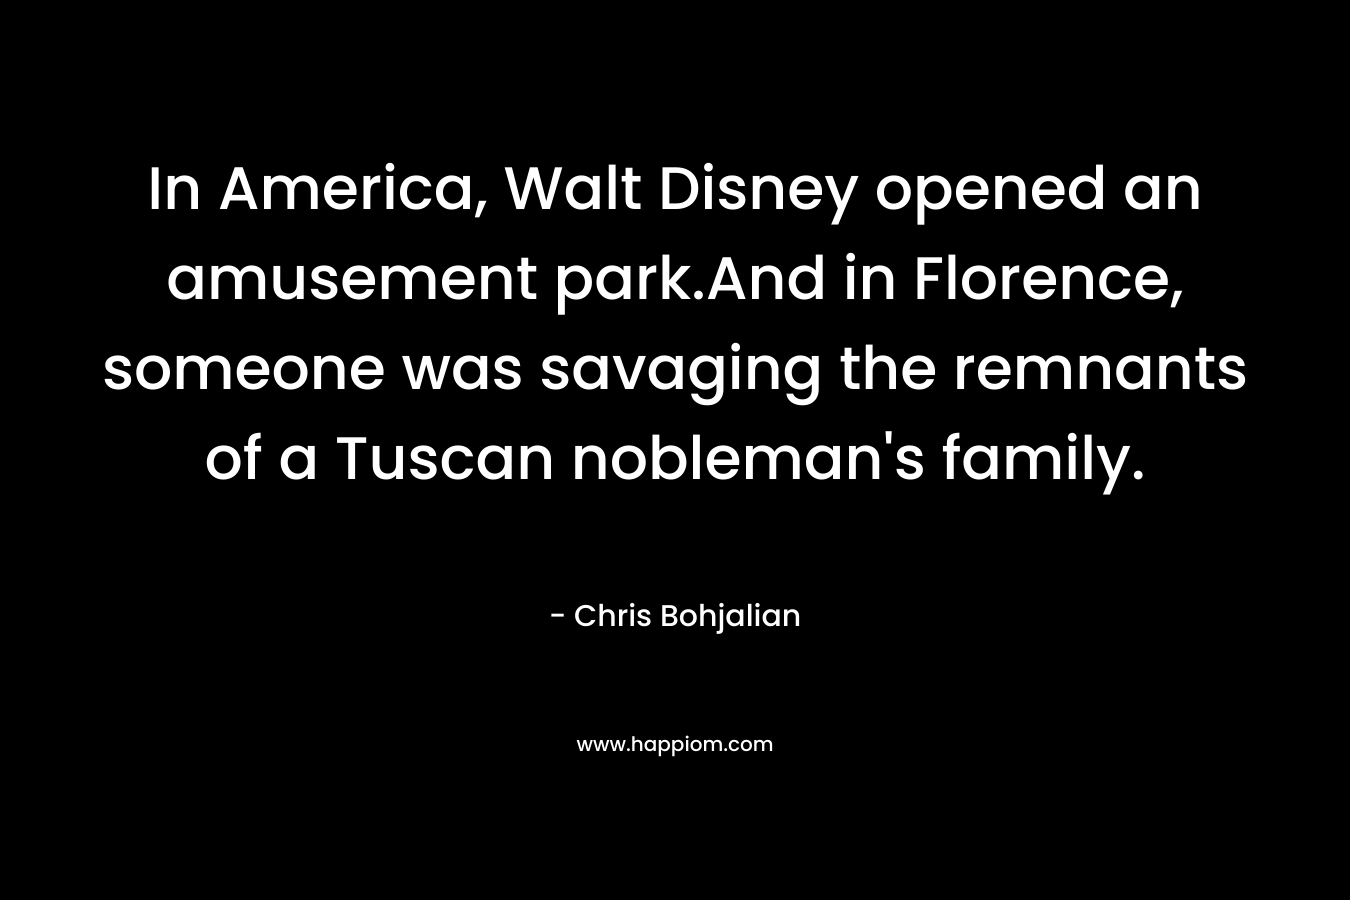 In America, Walt Disney opened an amusement park.And in Florence, someone was savaging the remnants of a Tuscan nobleman's family.